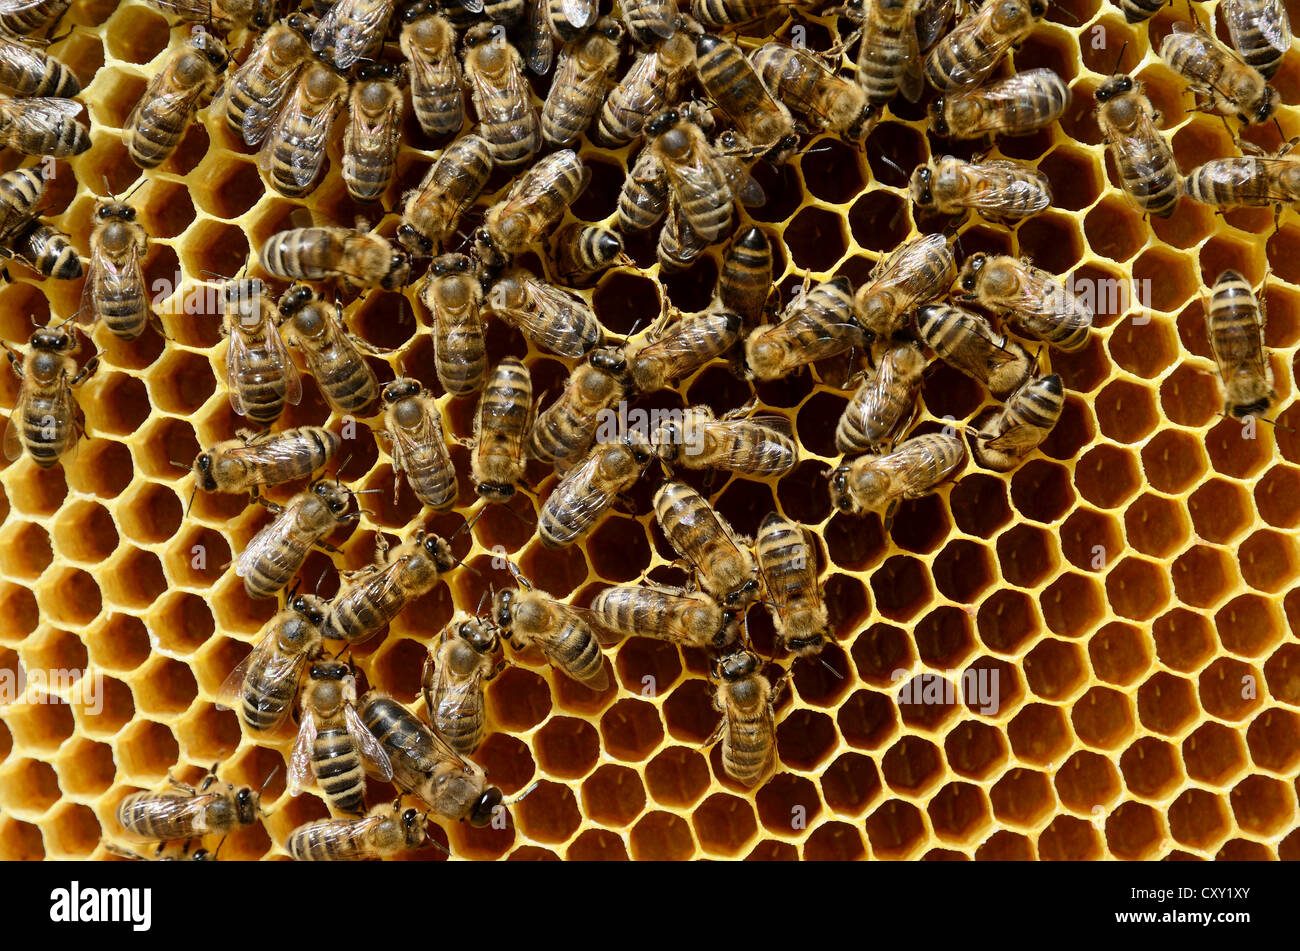 Honeybees (Apis mellifera var. carnica), on brood comb with freshly laid eggs in honeycomb cells Stock Photo